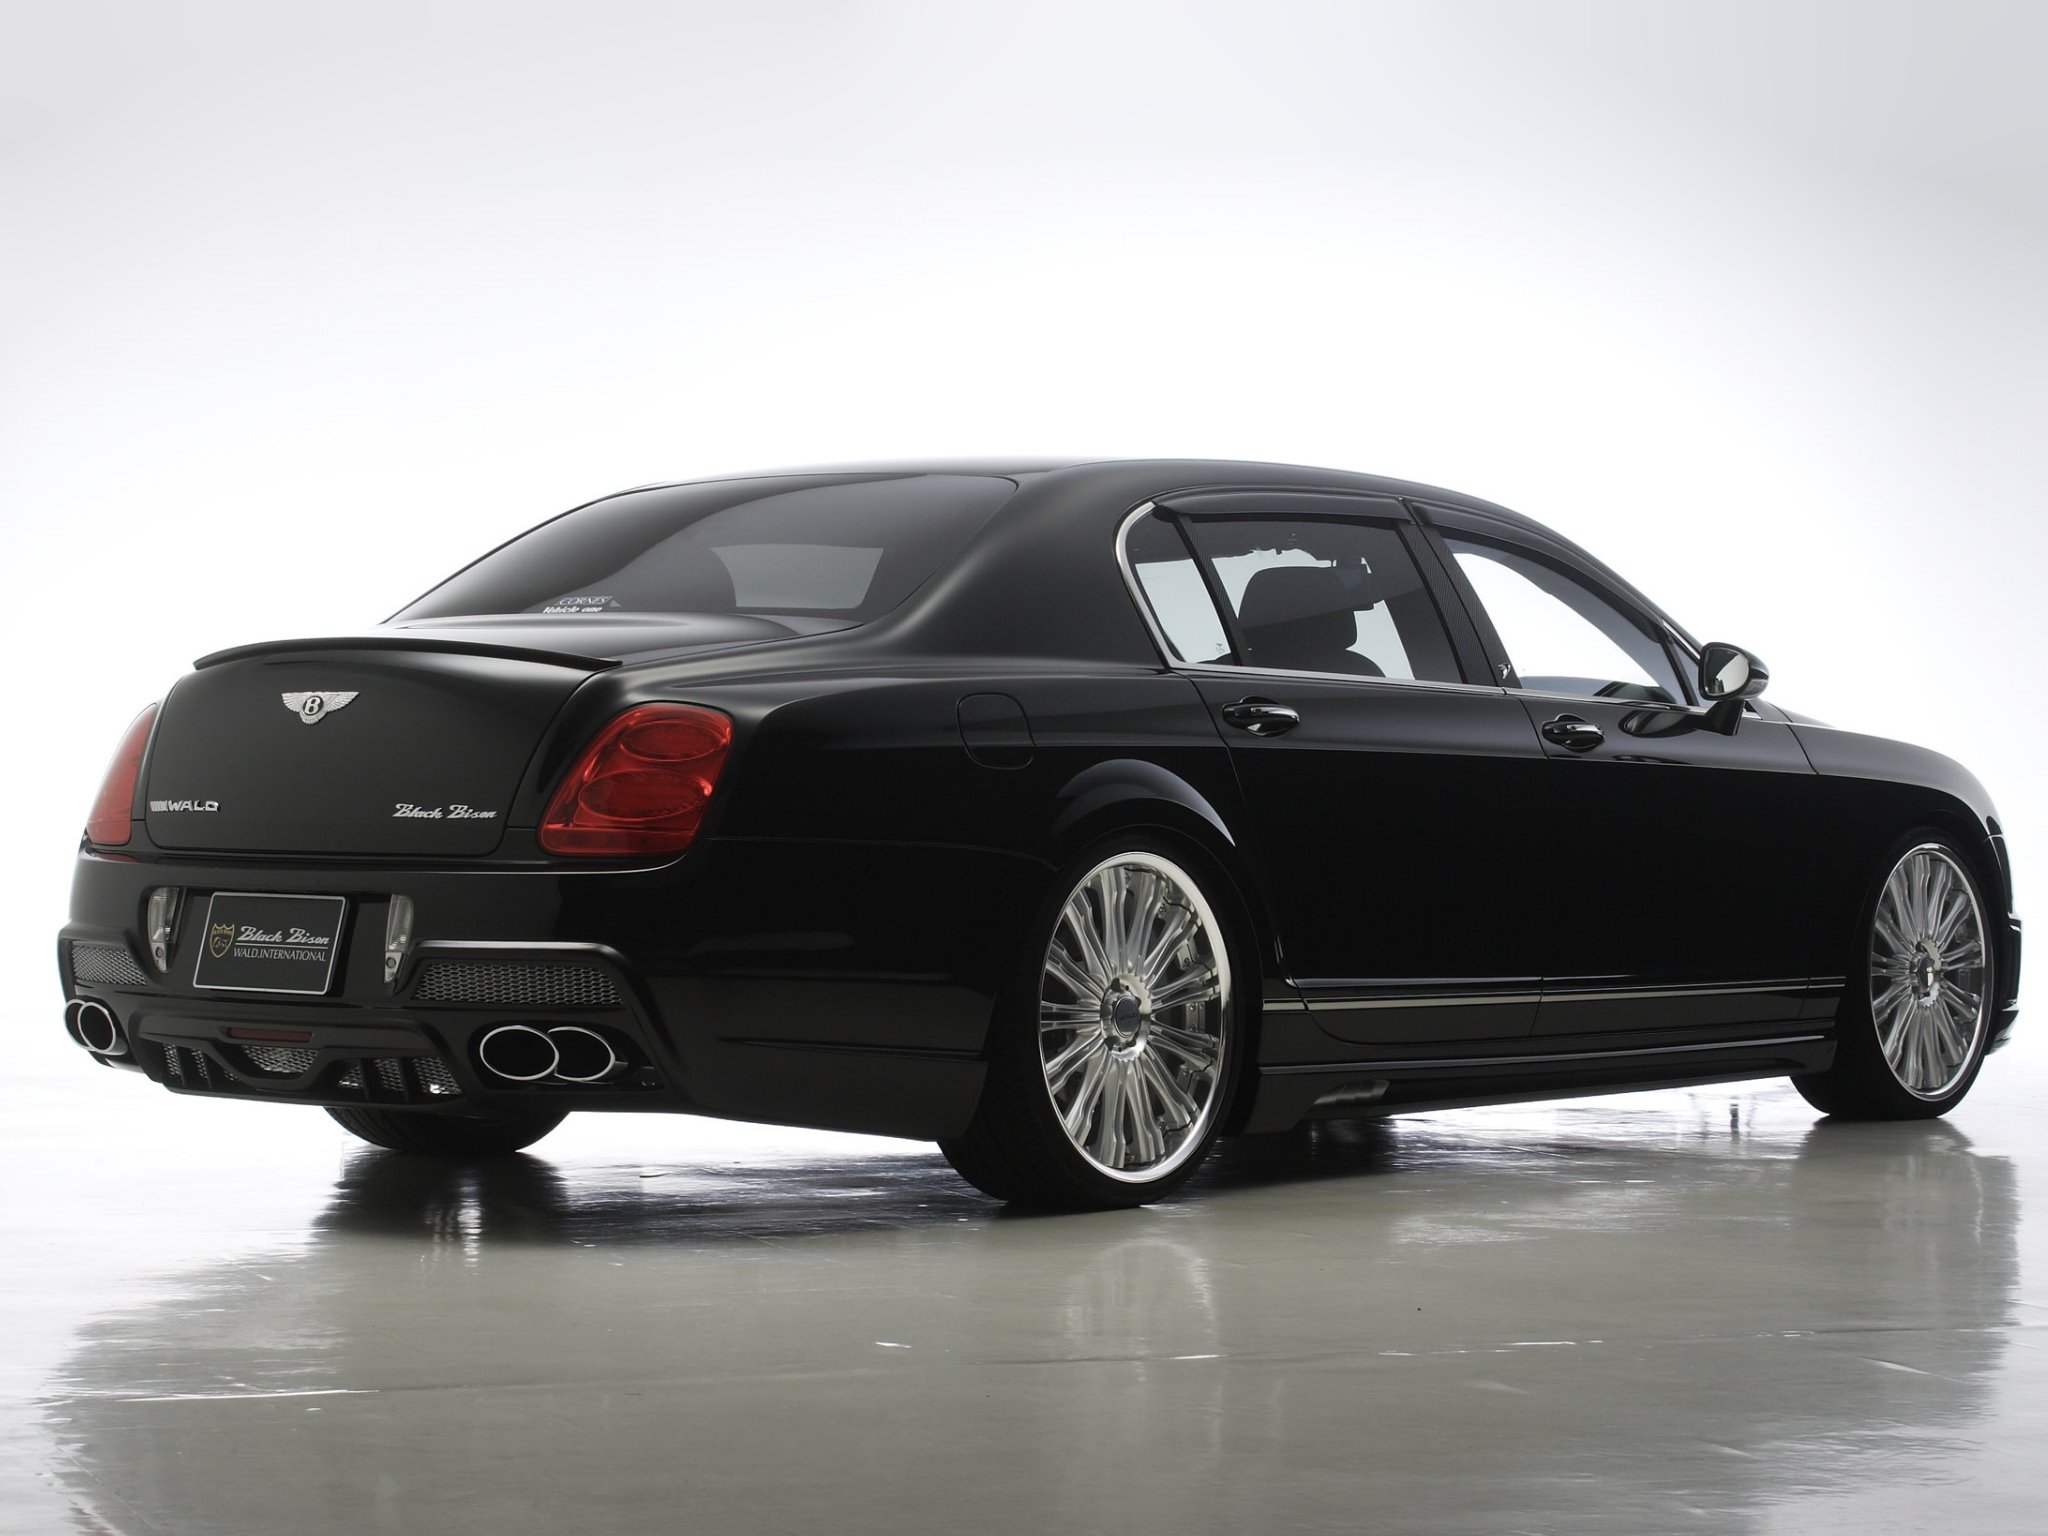 wald, International, Bentley, Continental, Flying, Spur, Black, Bison, Edition, Cars, Modified, 2010 Wallpaper